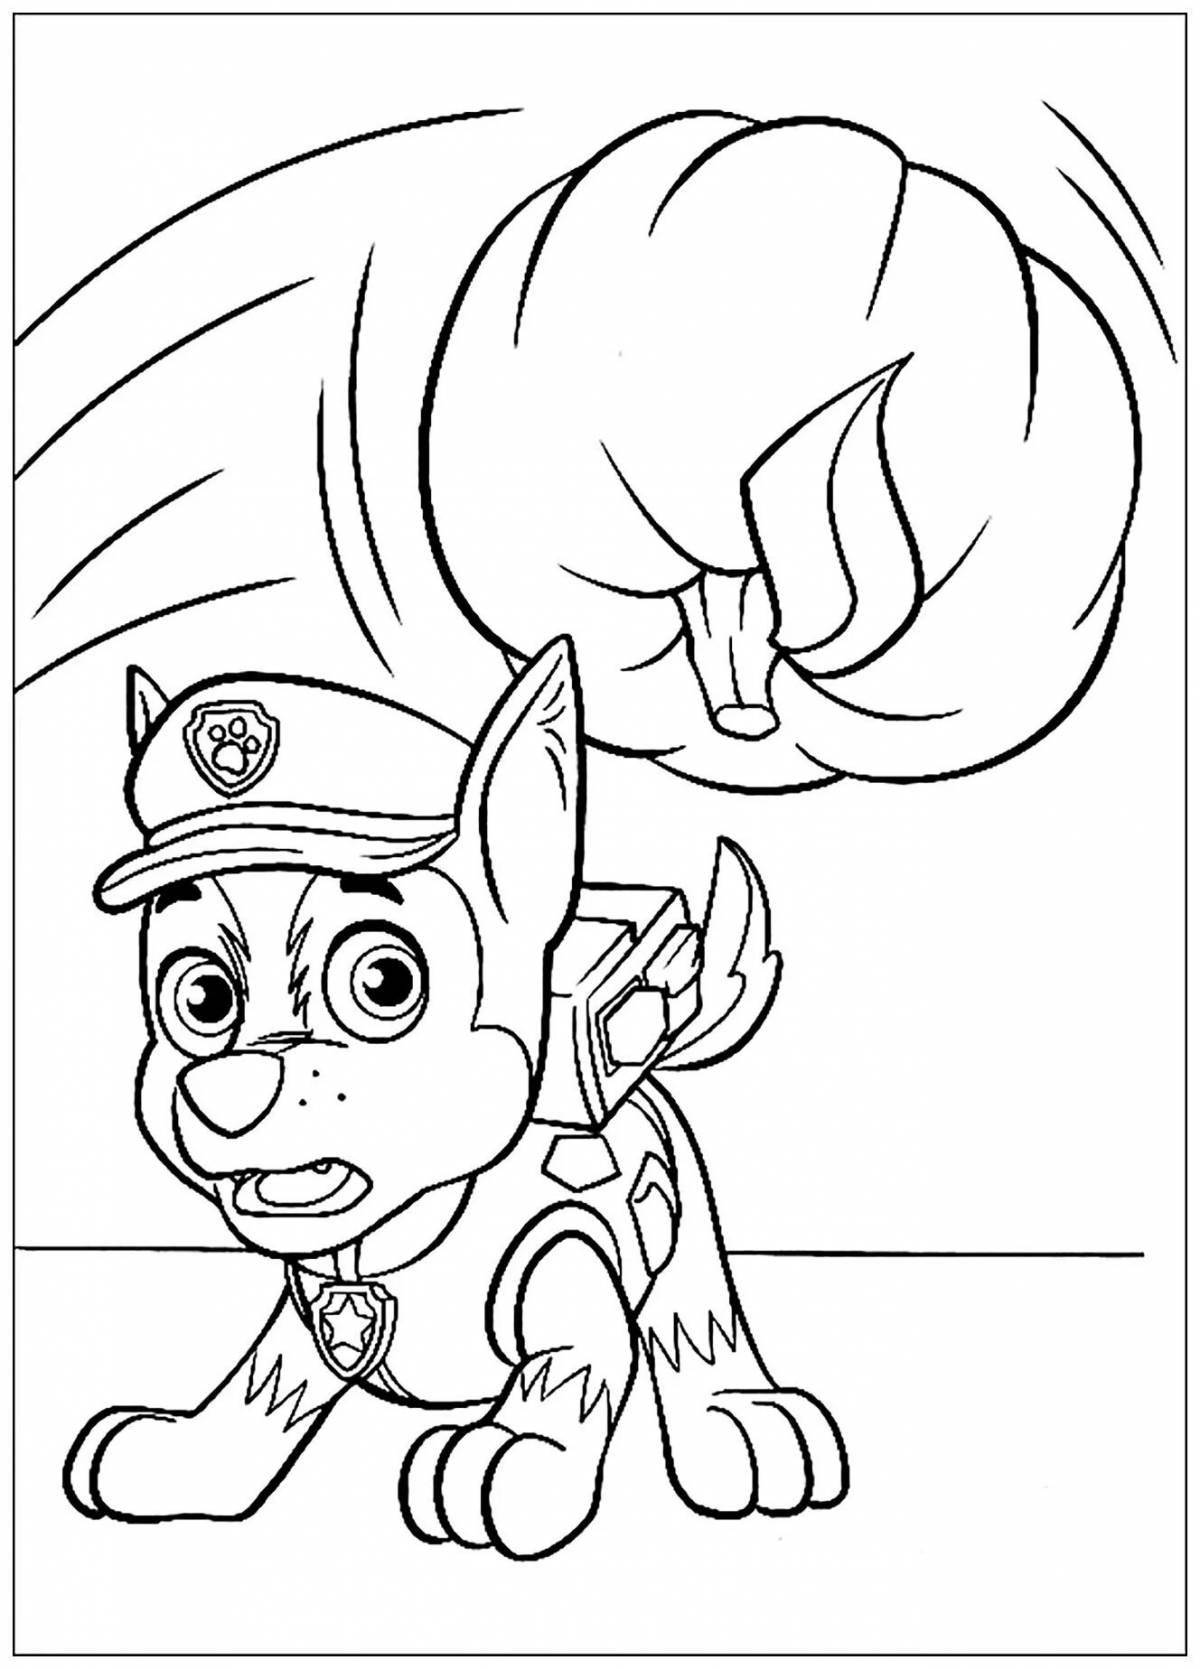 Charming puppy racer coloring book